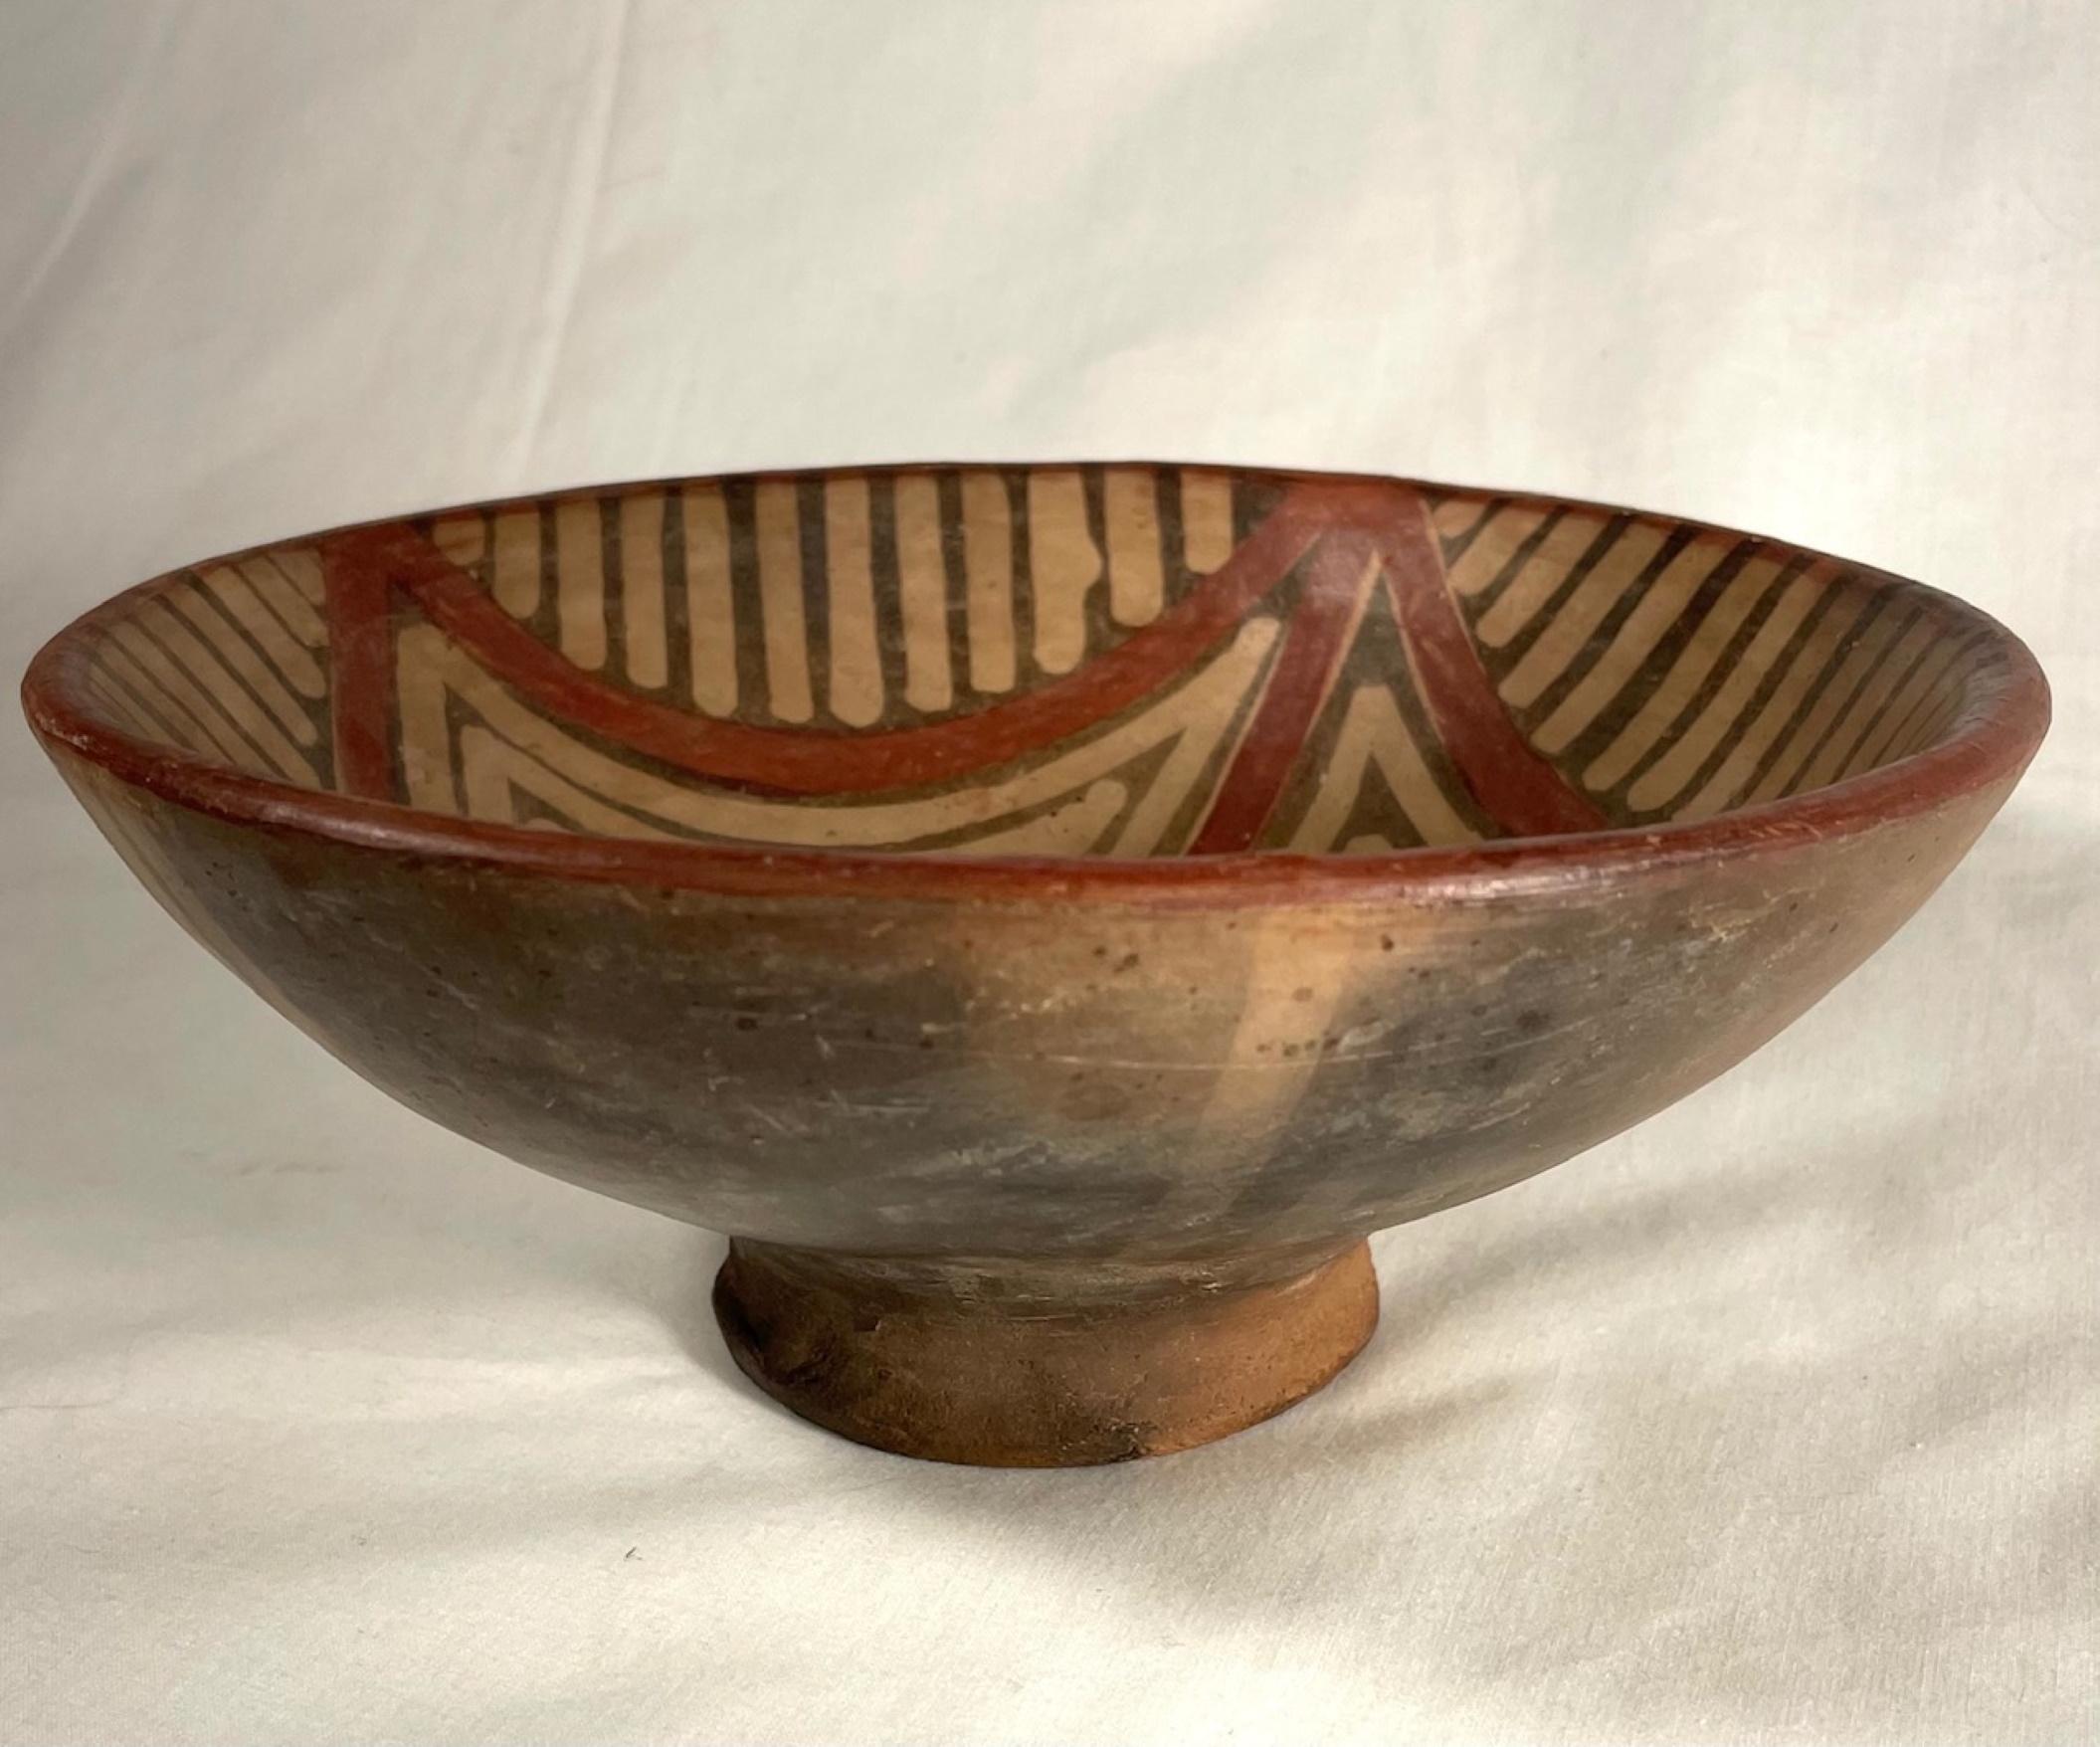 Pre Colombian, Ecuadorian Pottery bowl, Mucawa drinking vessel, Geometric motifs.

This beautiful specimen of geometric shapes is in excellent condition. A footed pottery celebratory drinking bowl vessel (Mucawa) is painted all over with the